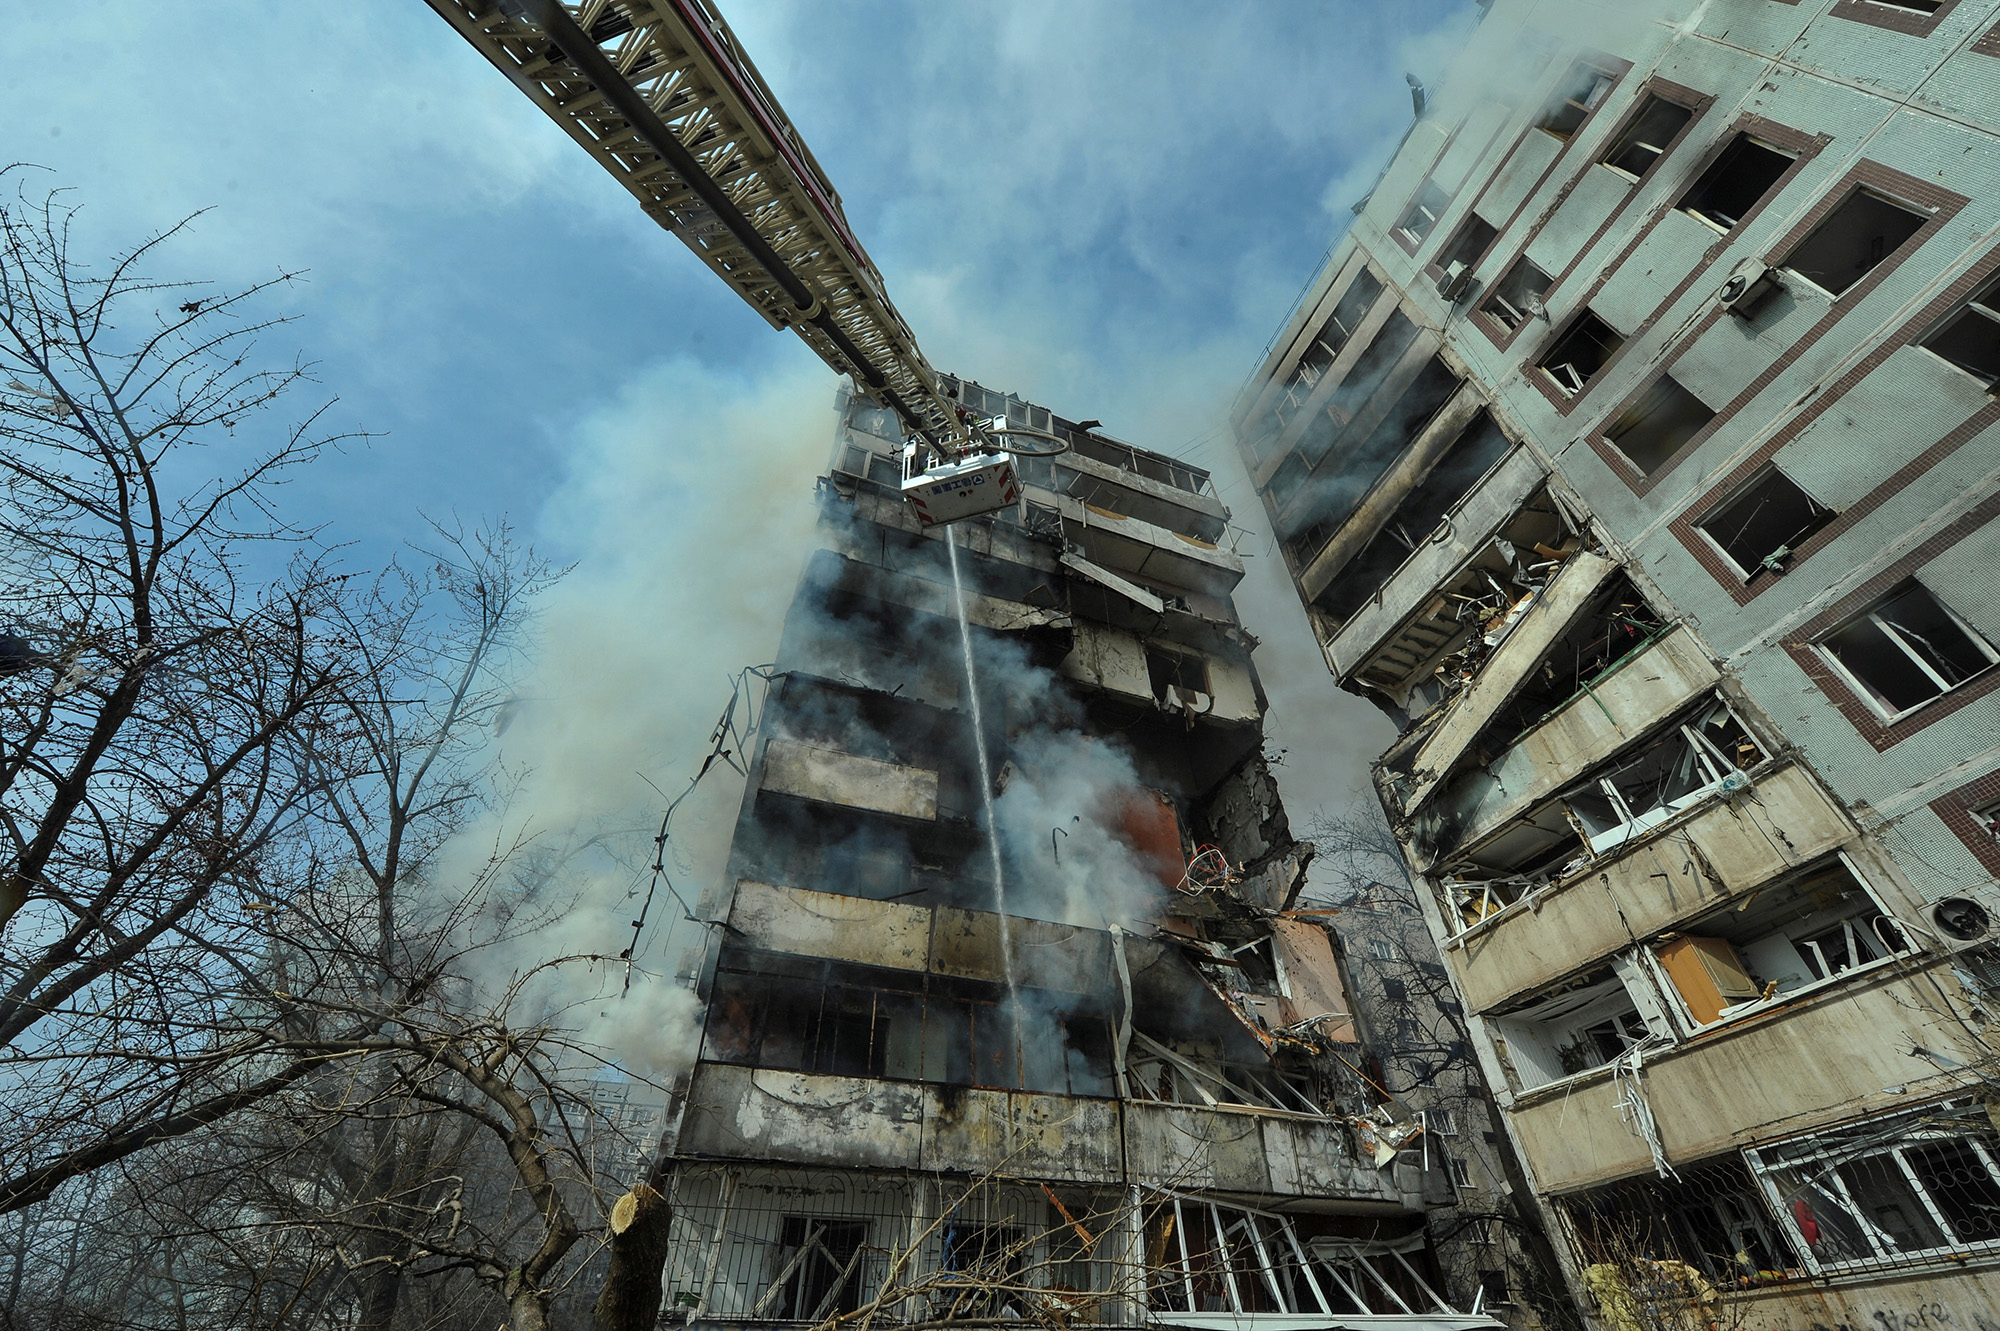 A ladder extends against a residential building damaged by a Russian missile strike in Zaporizhzhia, Ukraine, on March 22.